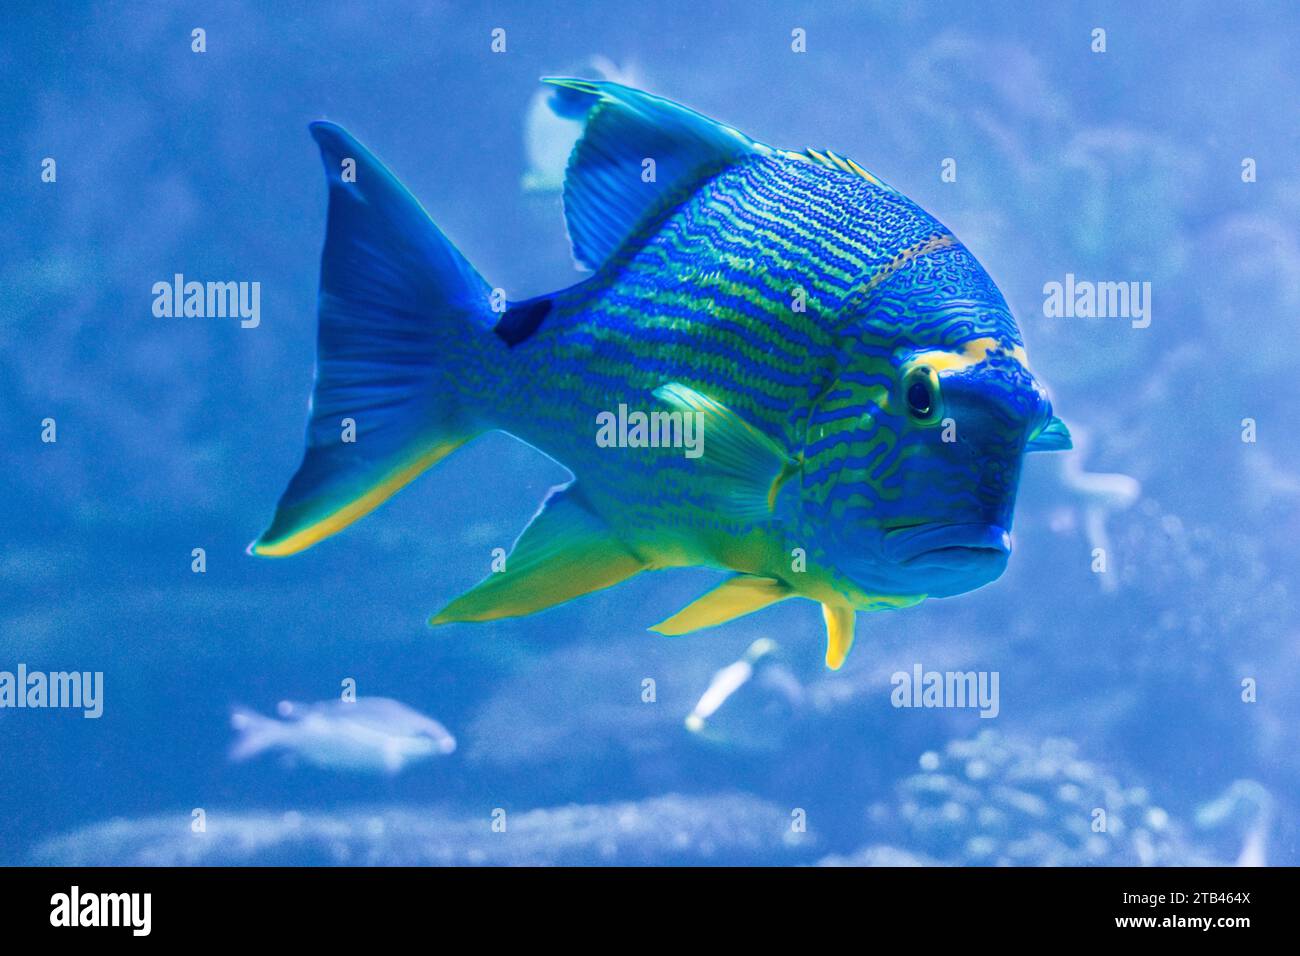 Sailfin snapper fish or blue-lined sea bream in a aquarium. Symphorichthys spilurus species living in eastern Indian Ocean and western Pacific. Stock Photo